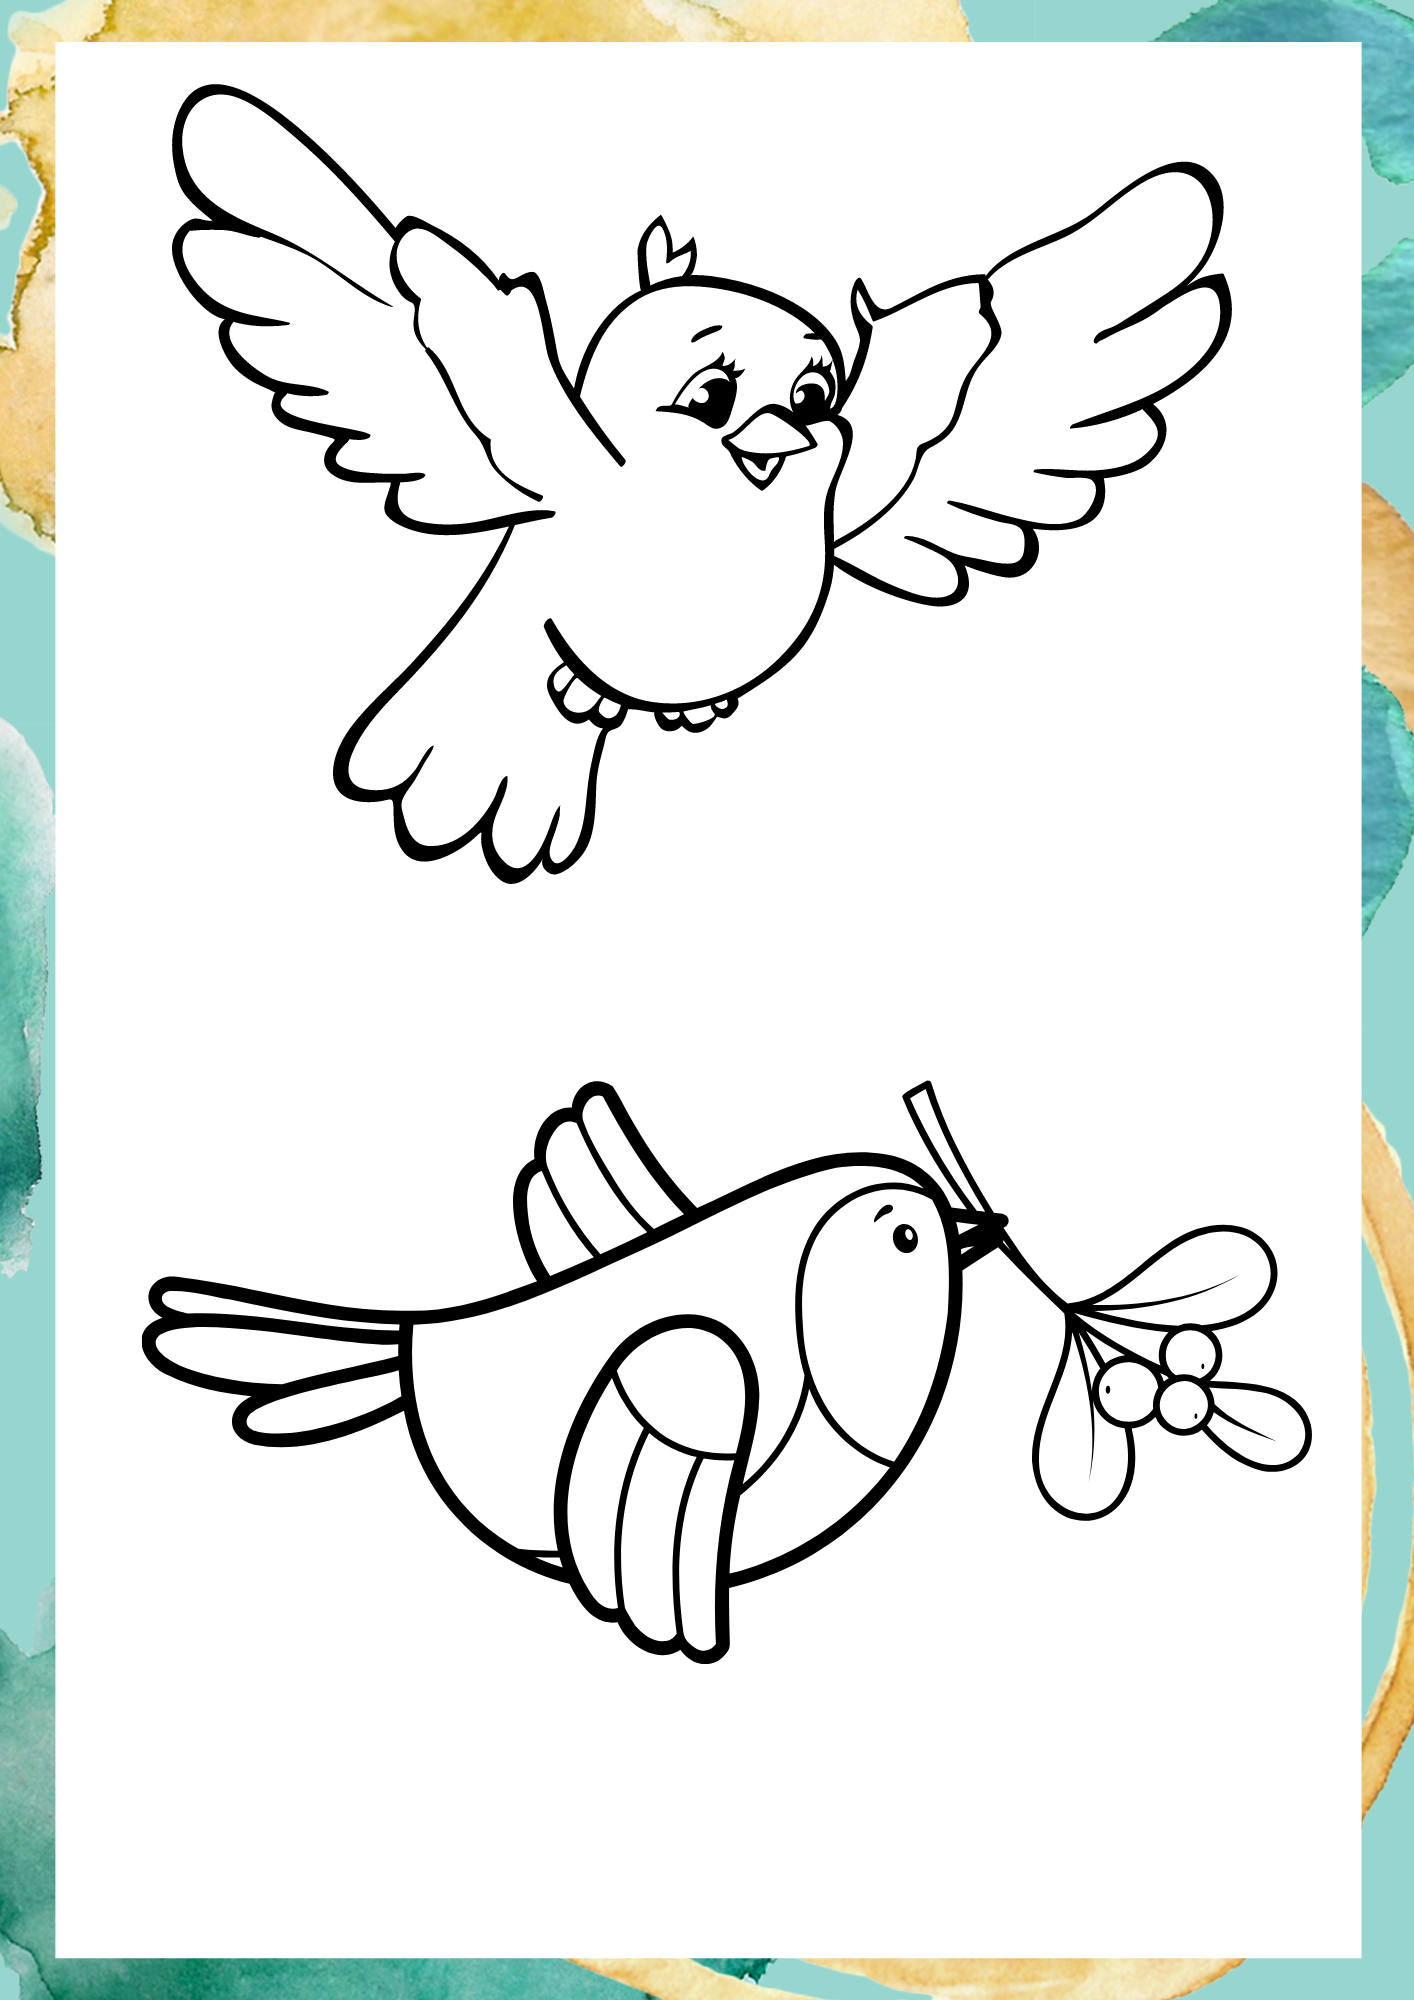 sparrow coloring page, bird coloring page, coloring page, coloring page for toddlers, Coloring Page, coloring sheet, happy color, colouring, free coloring pages, coloring pages for kids, printable coloring pages, cute coloring pages, colouring pages, colouring to print, free printable coloring pages, free coloring pages for kids, easy coloring pages, coloring sheets